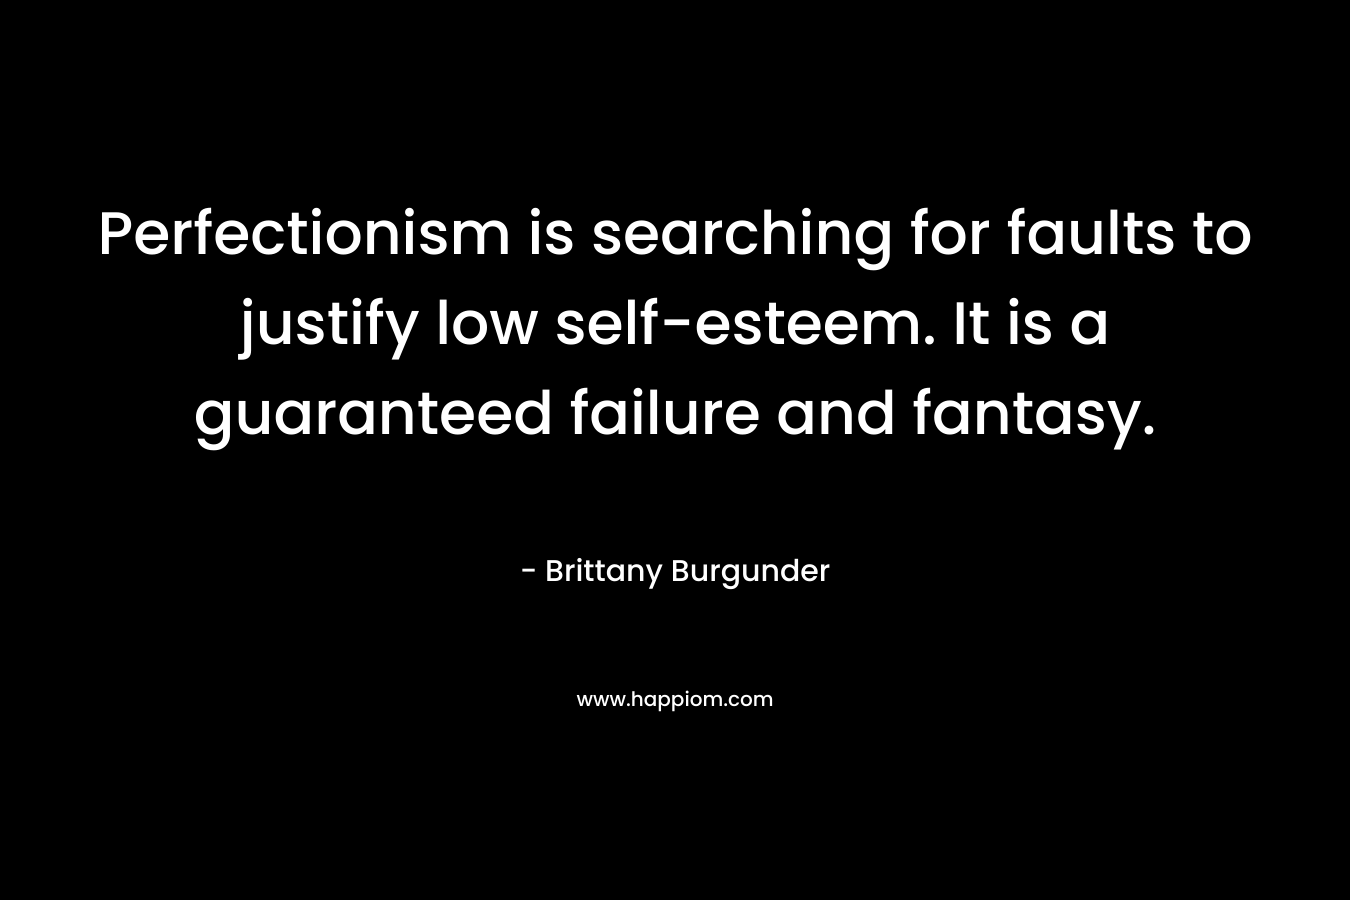 Perfectionism is searching for faults to justify low self-esteem. It is a guaranteed failure and fantasy. – Brittany Burgunder